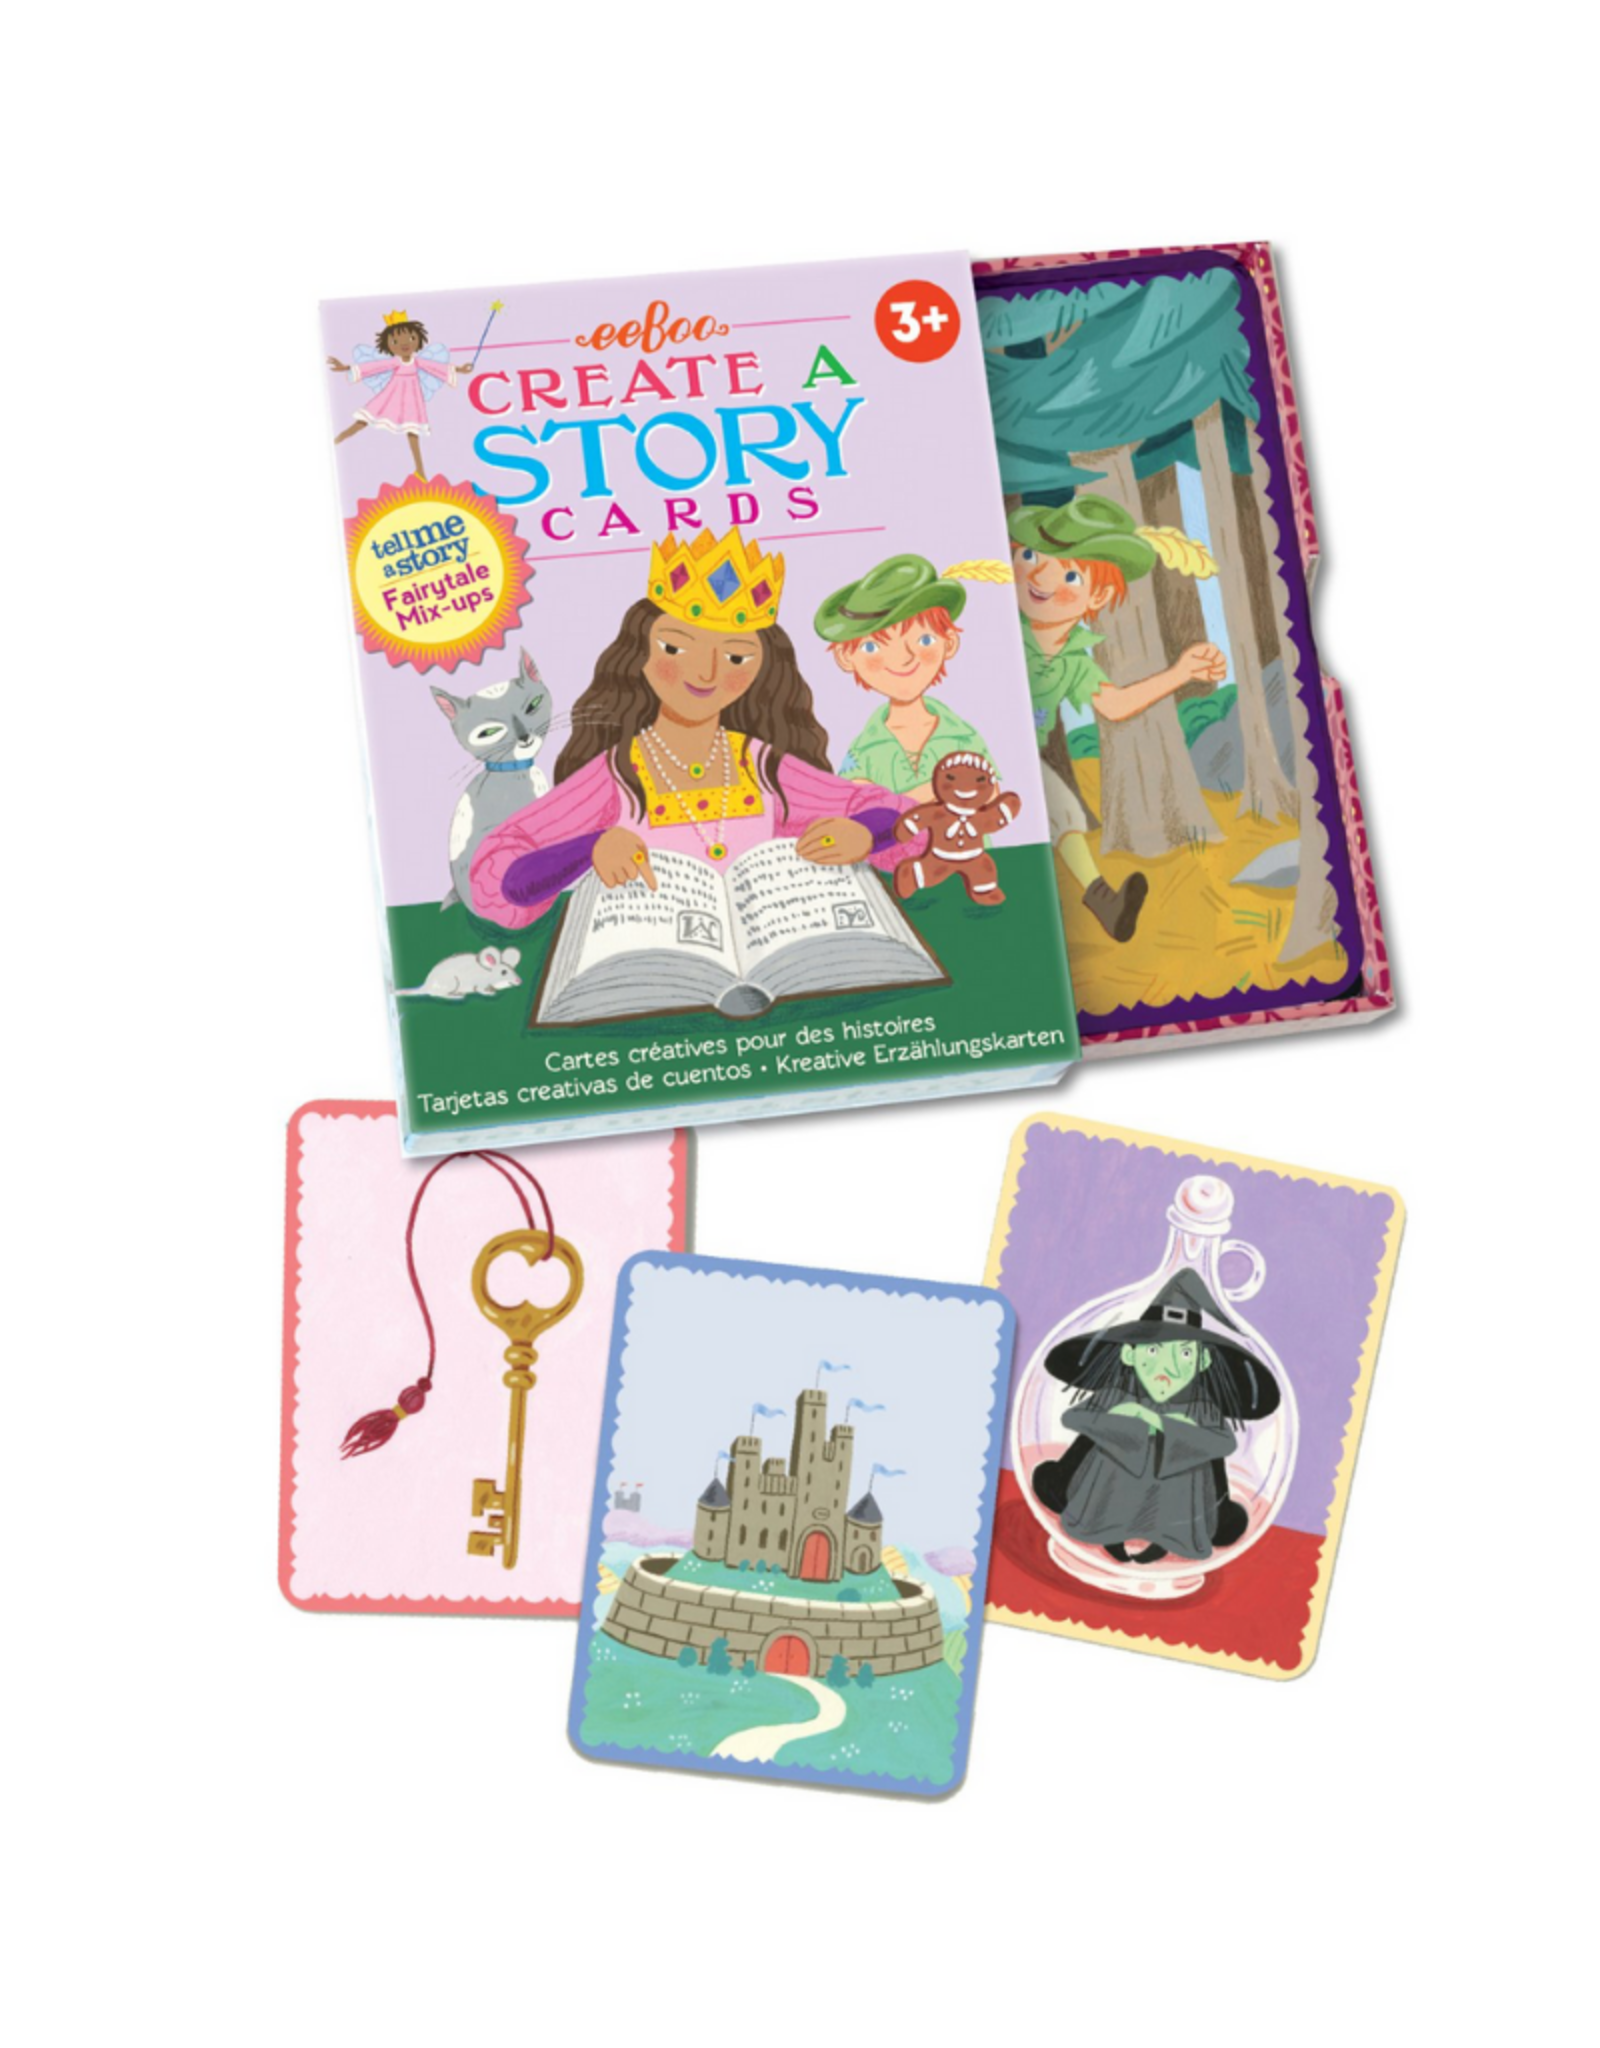 Create A Story: Fairy Tale Mix-Up